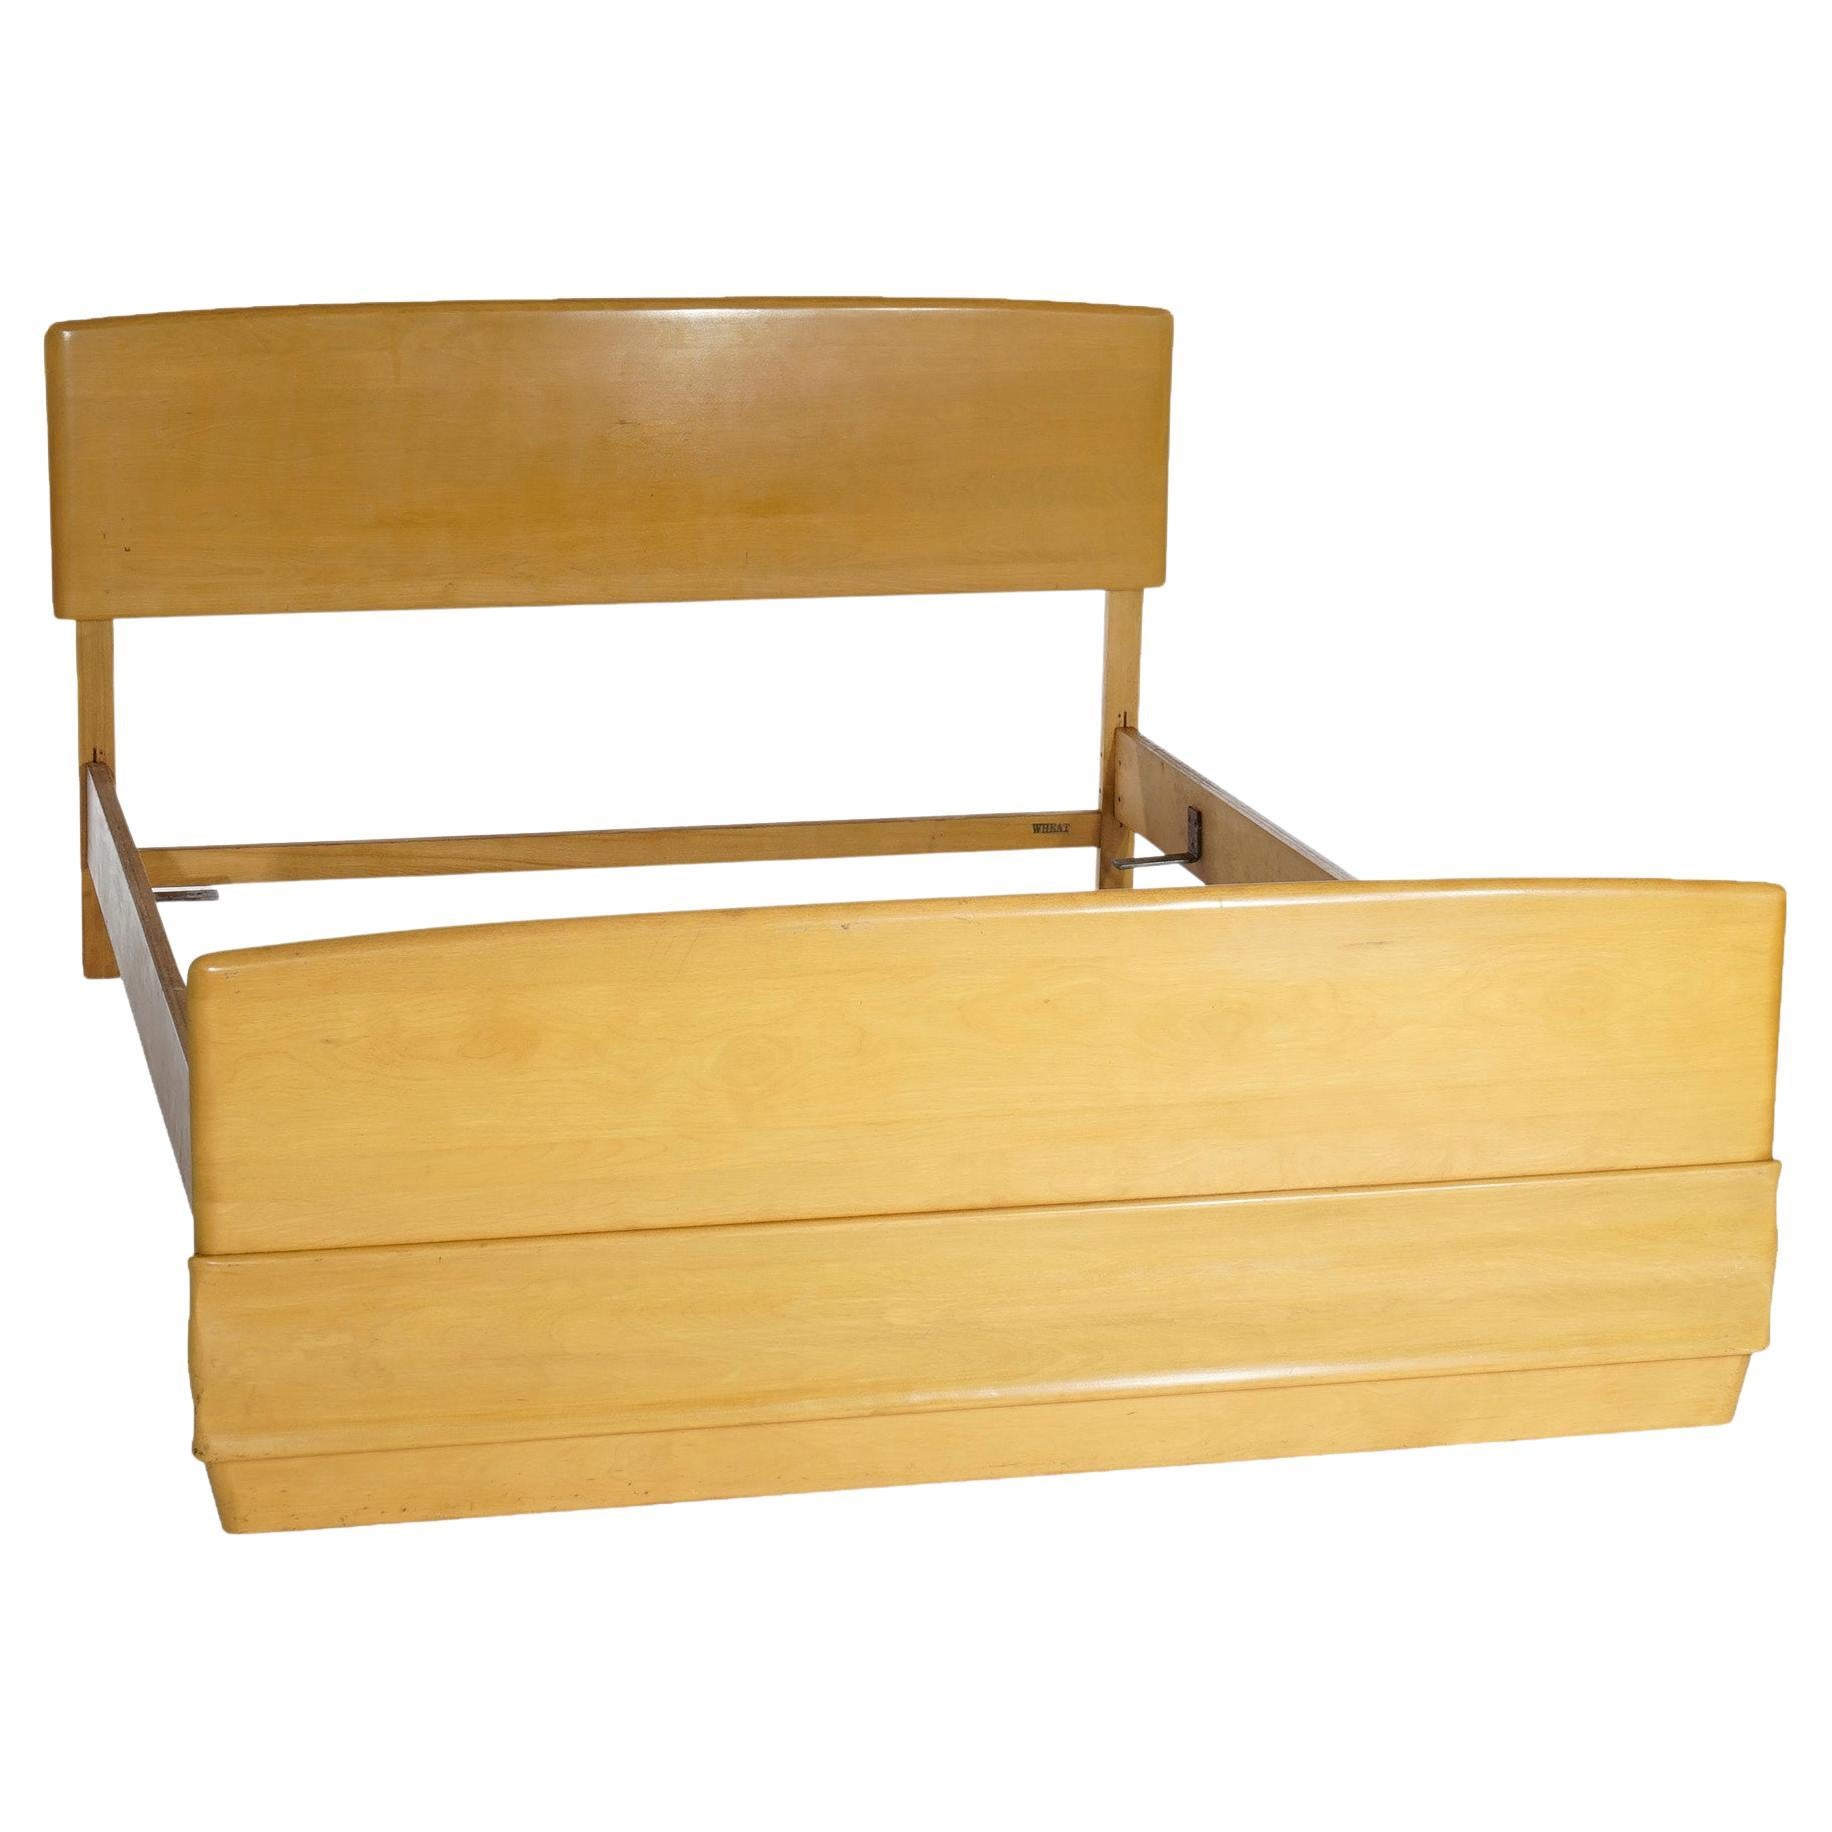 Mid-Century Modern Heywood Wakefield Double Bed, Wheat Finish, circa 1950 For Sale